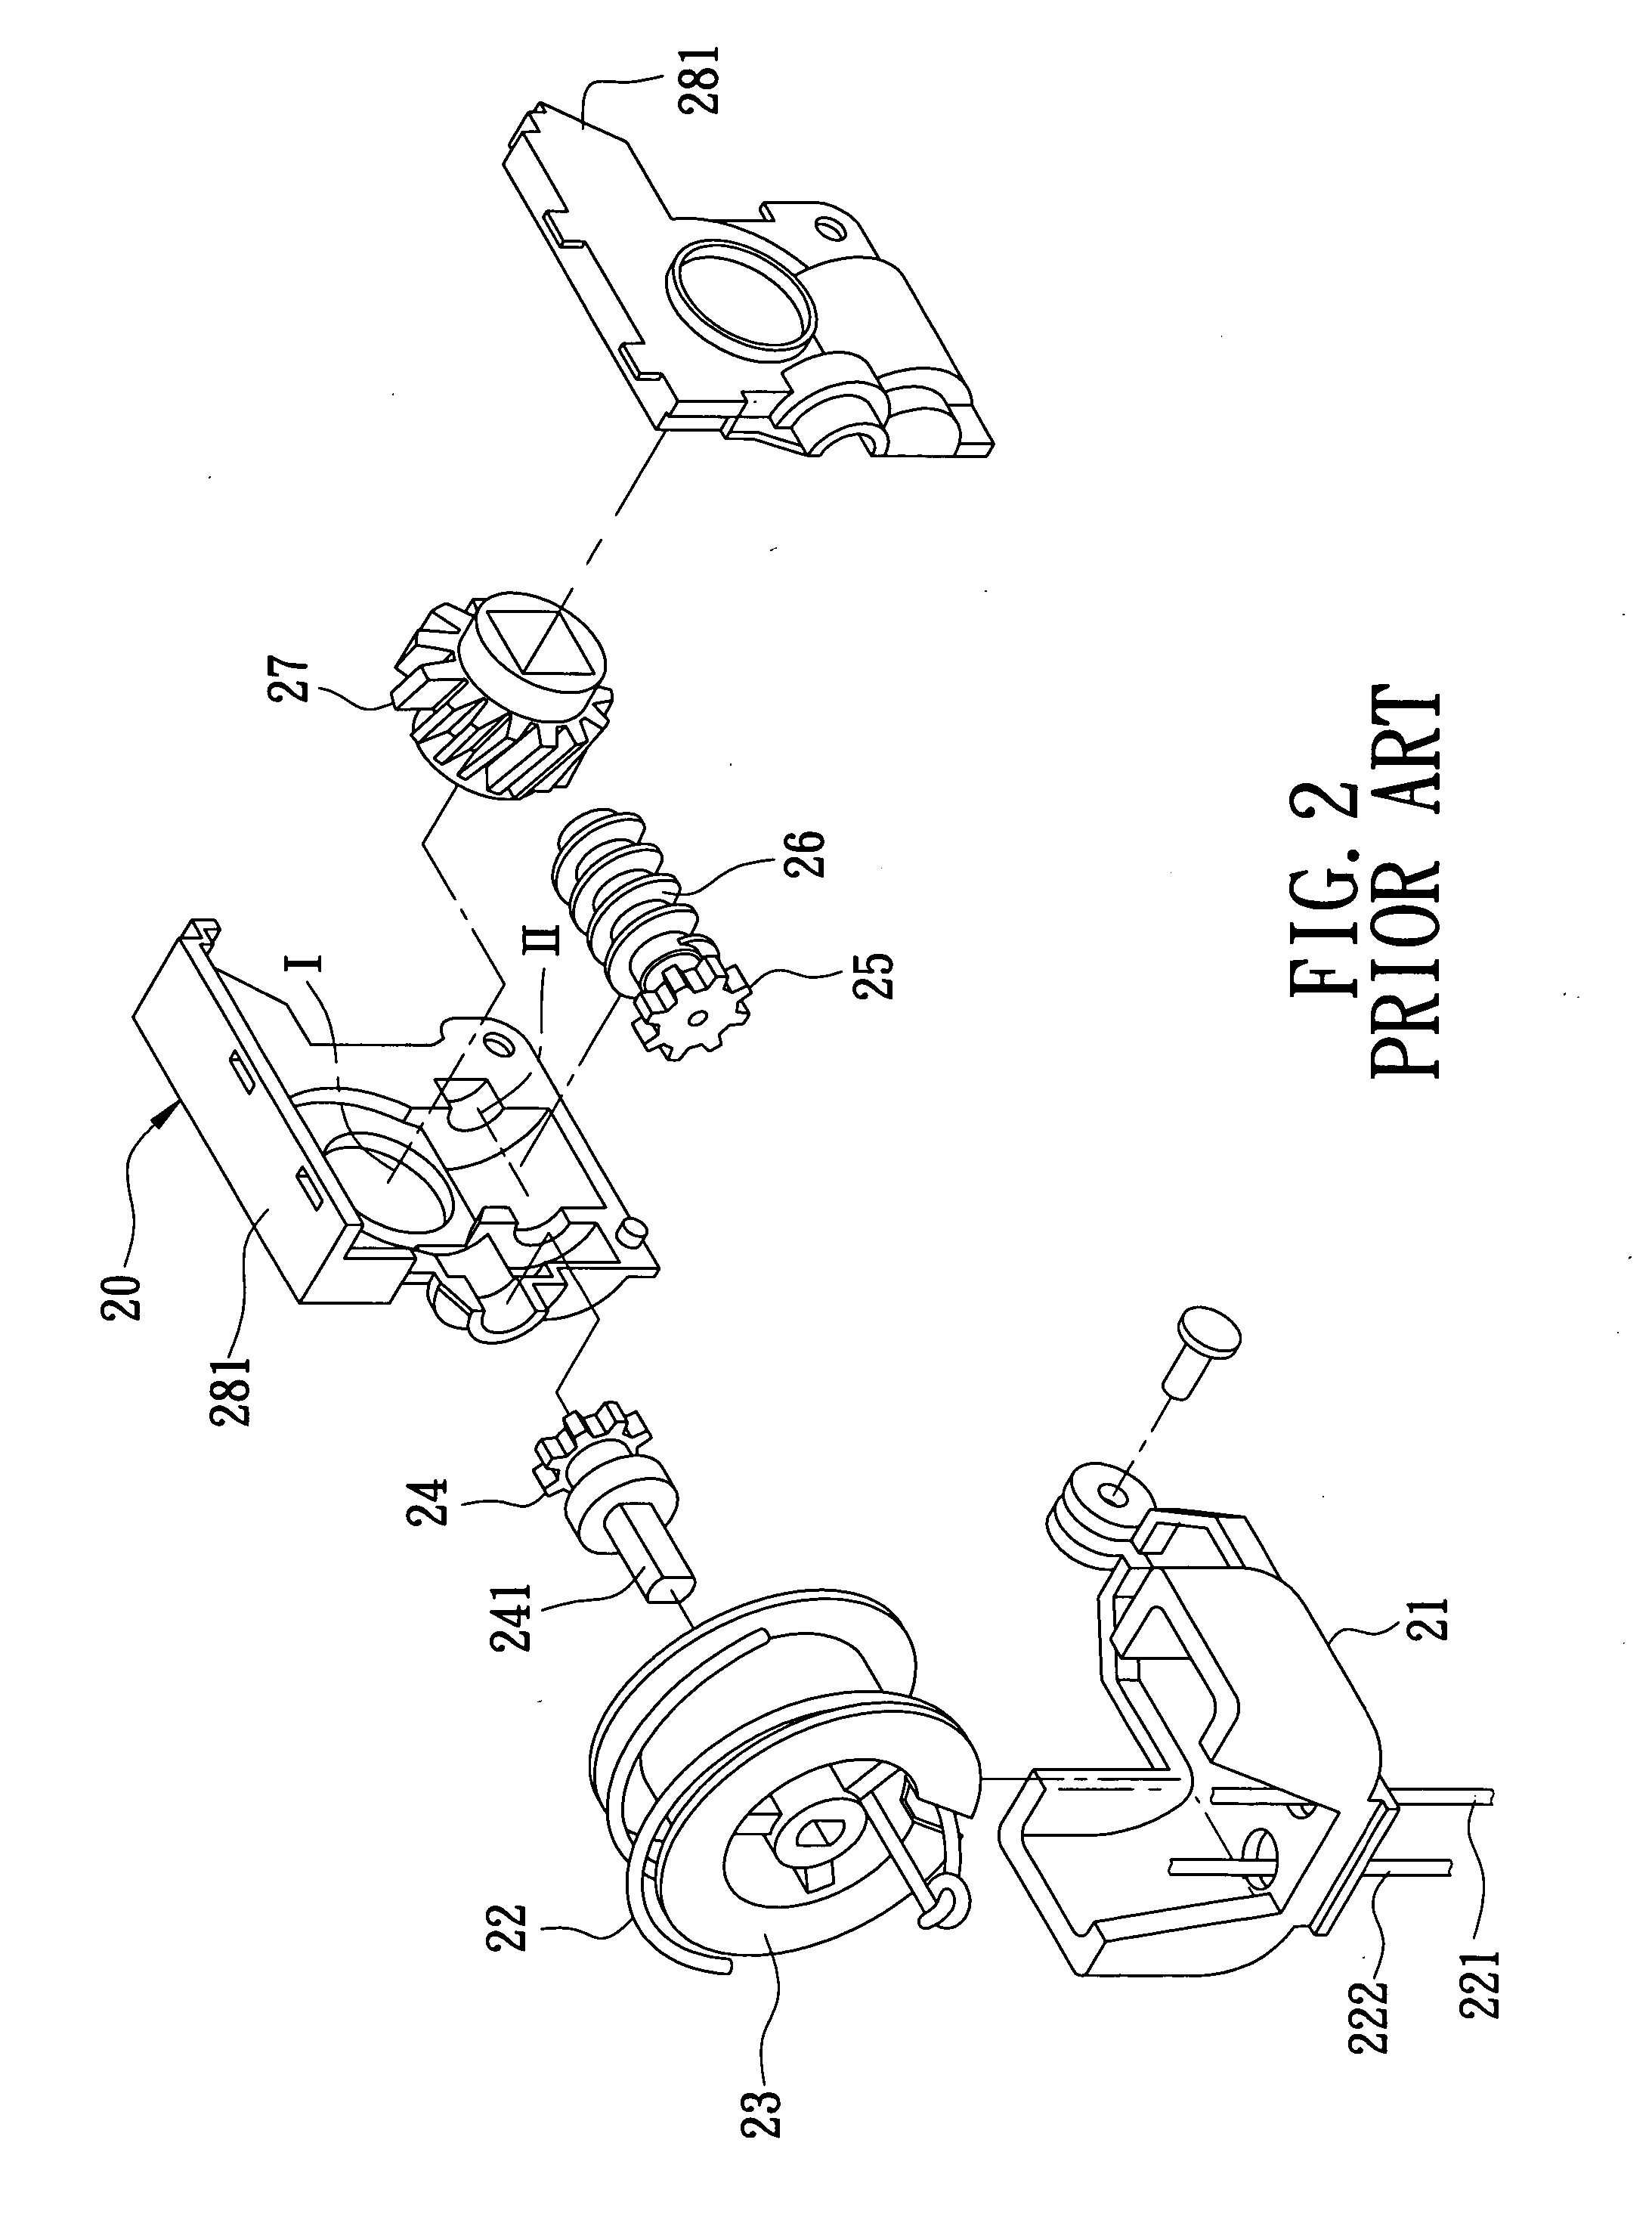 Slat tilting device for a window covering